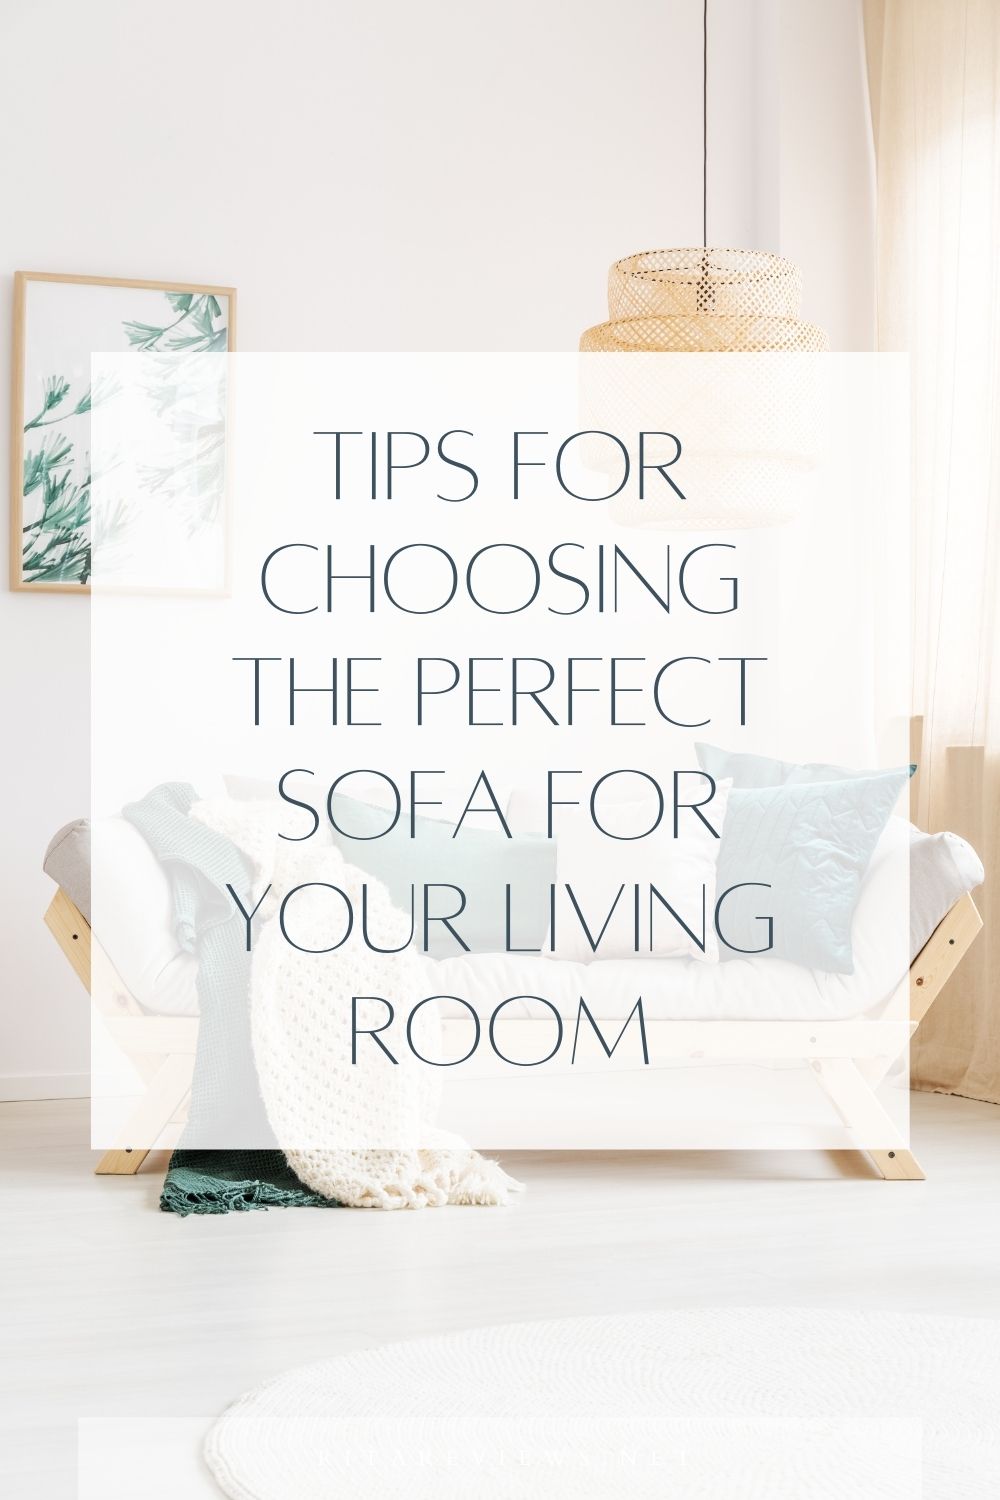 Tips for Choosing the Perfect Sofa for Your Living Room